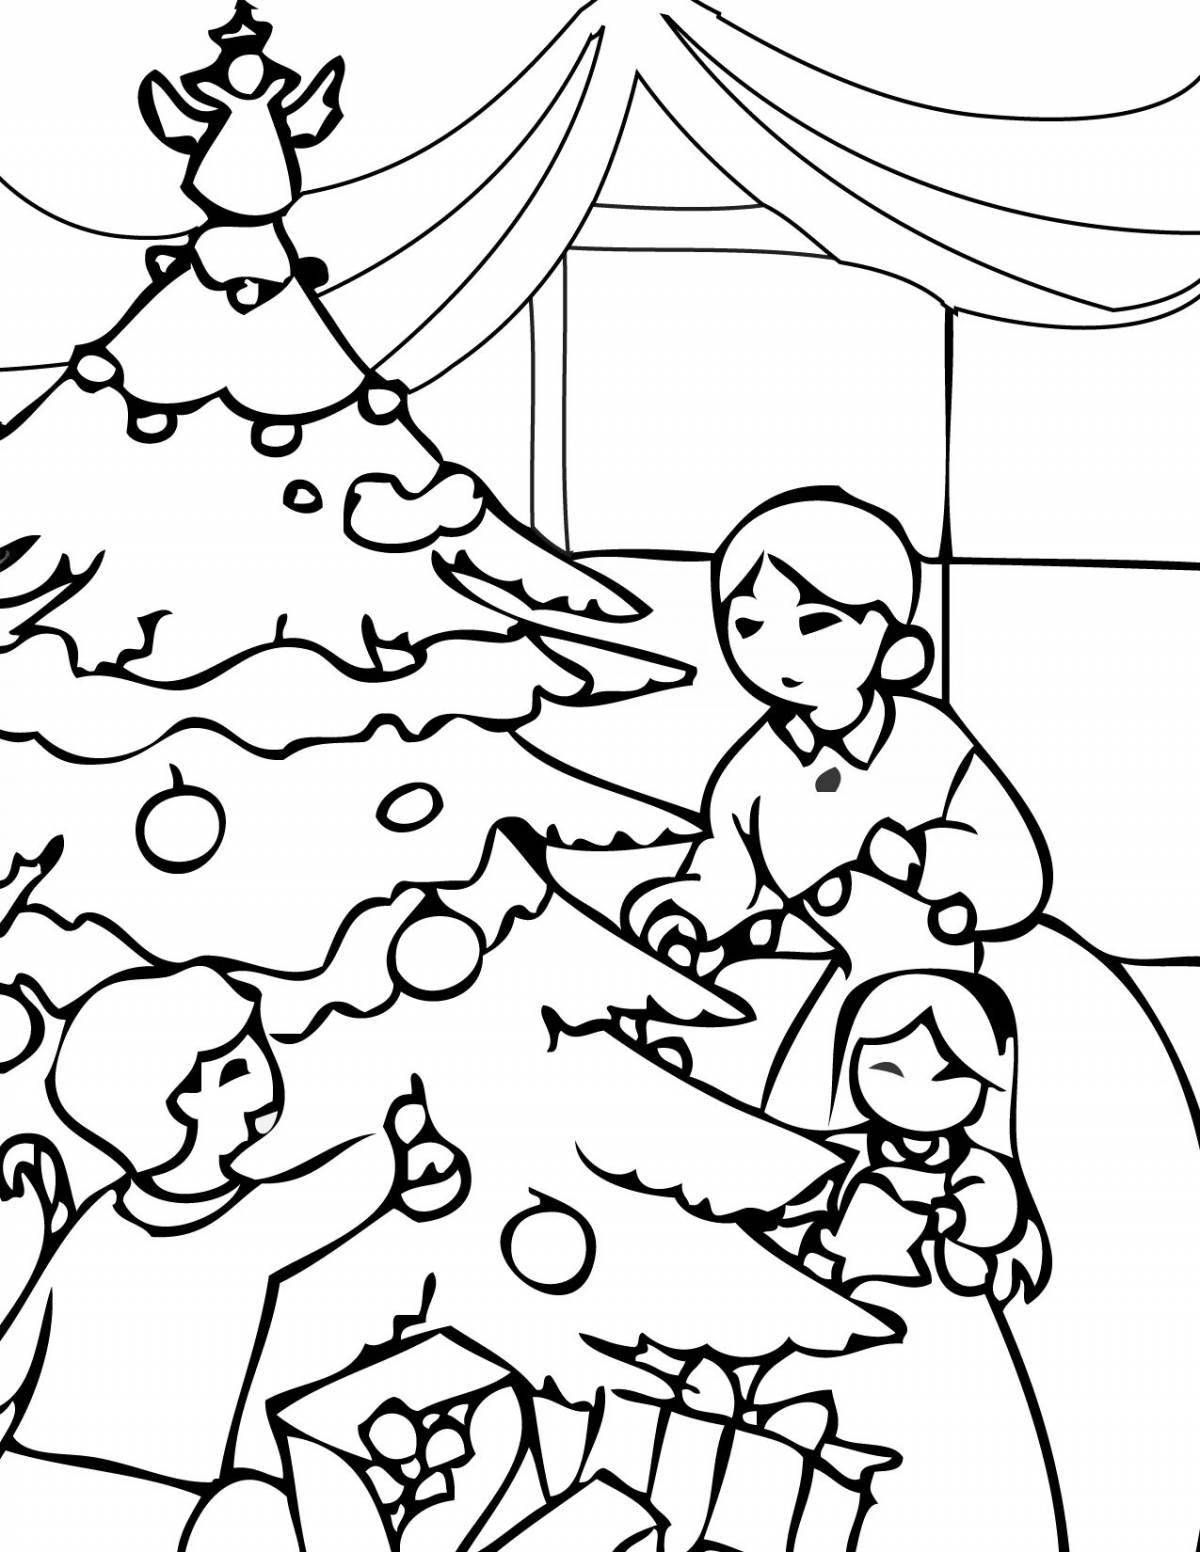 Sweet Christmas story coloring book